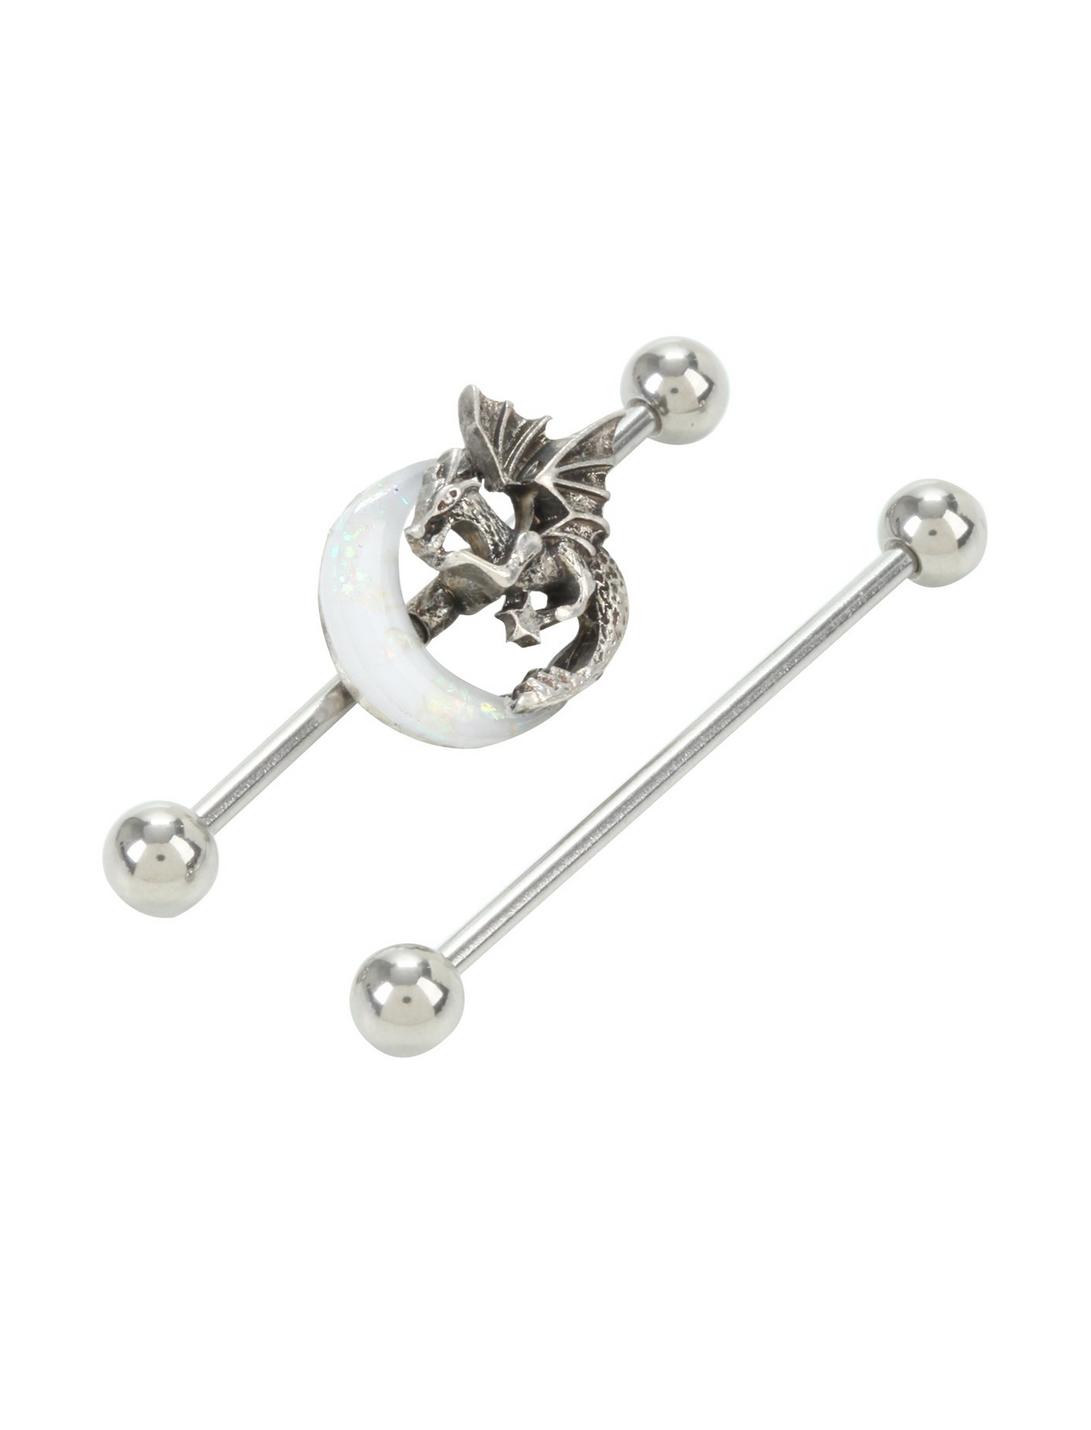 14G Steel Dragon Moon Industrial Barbell 2 Pack | Hot Topic